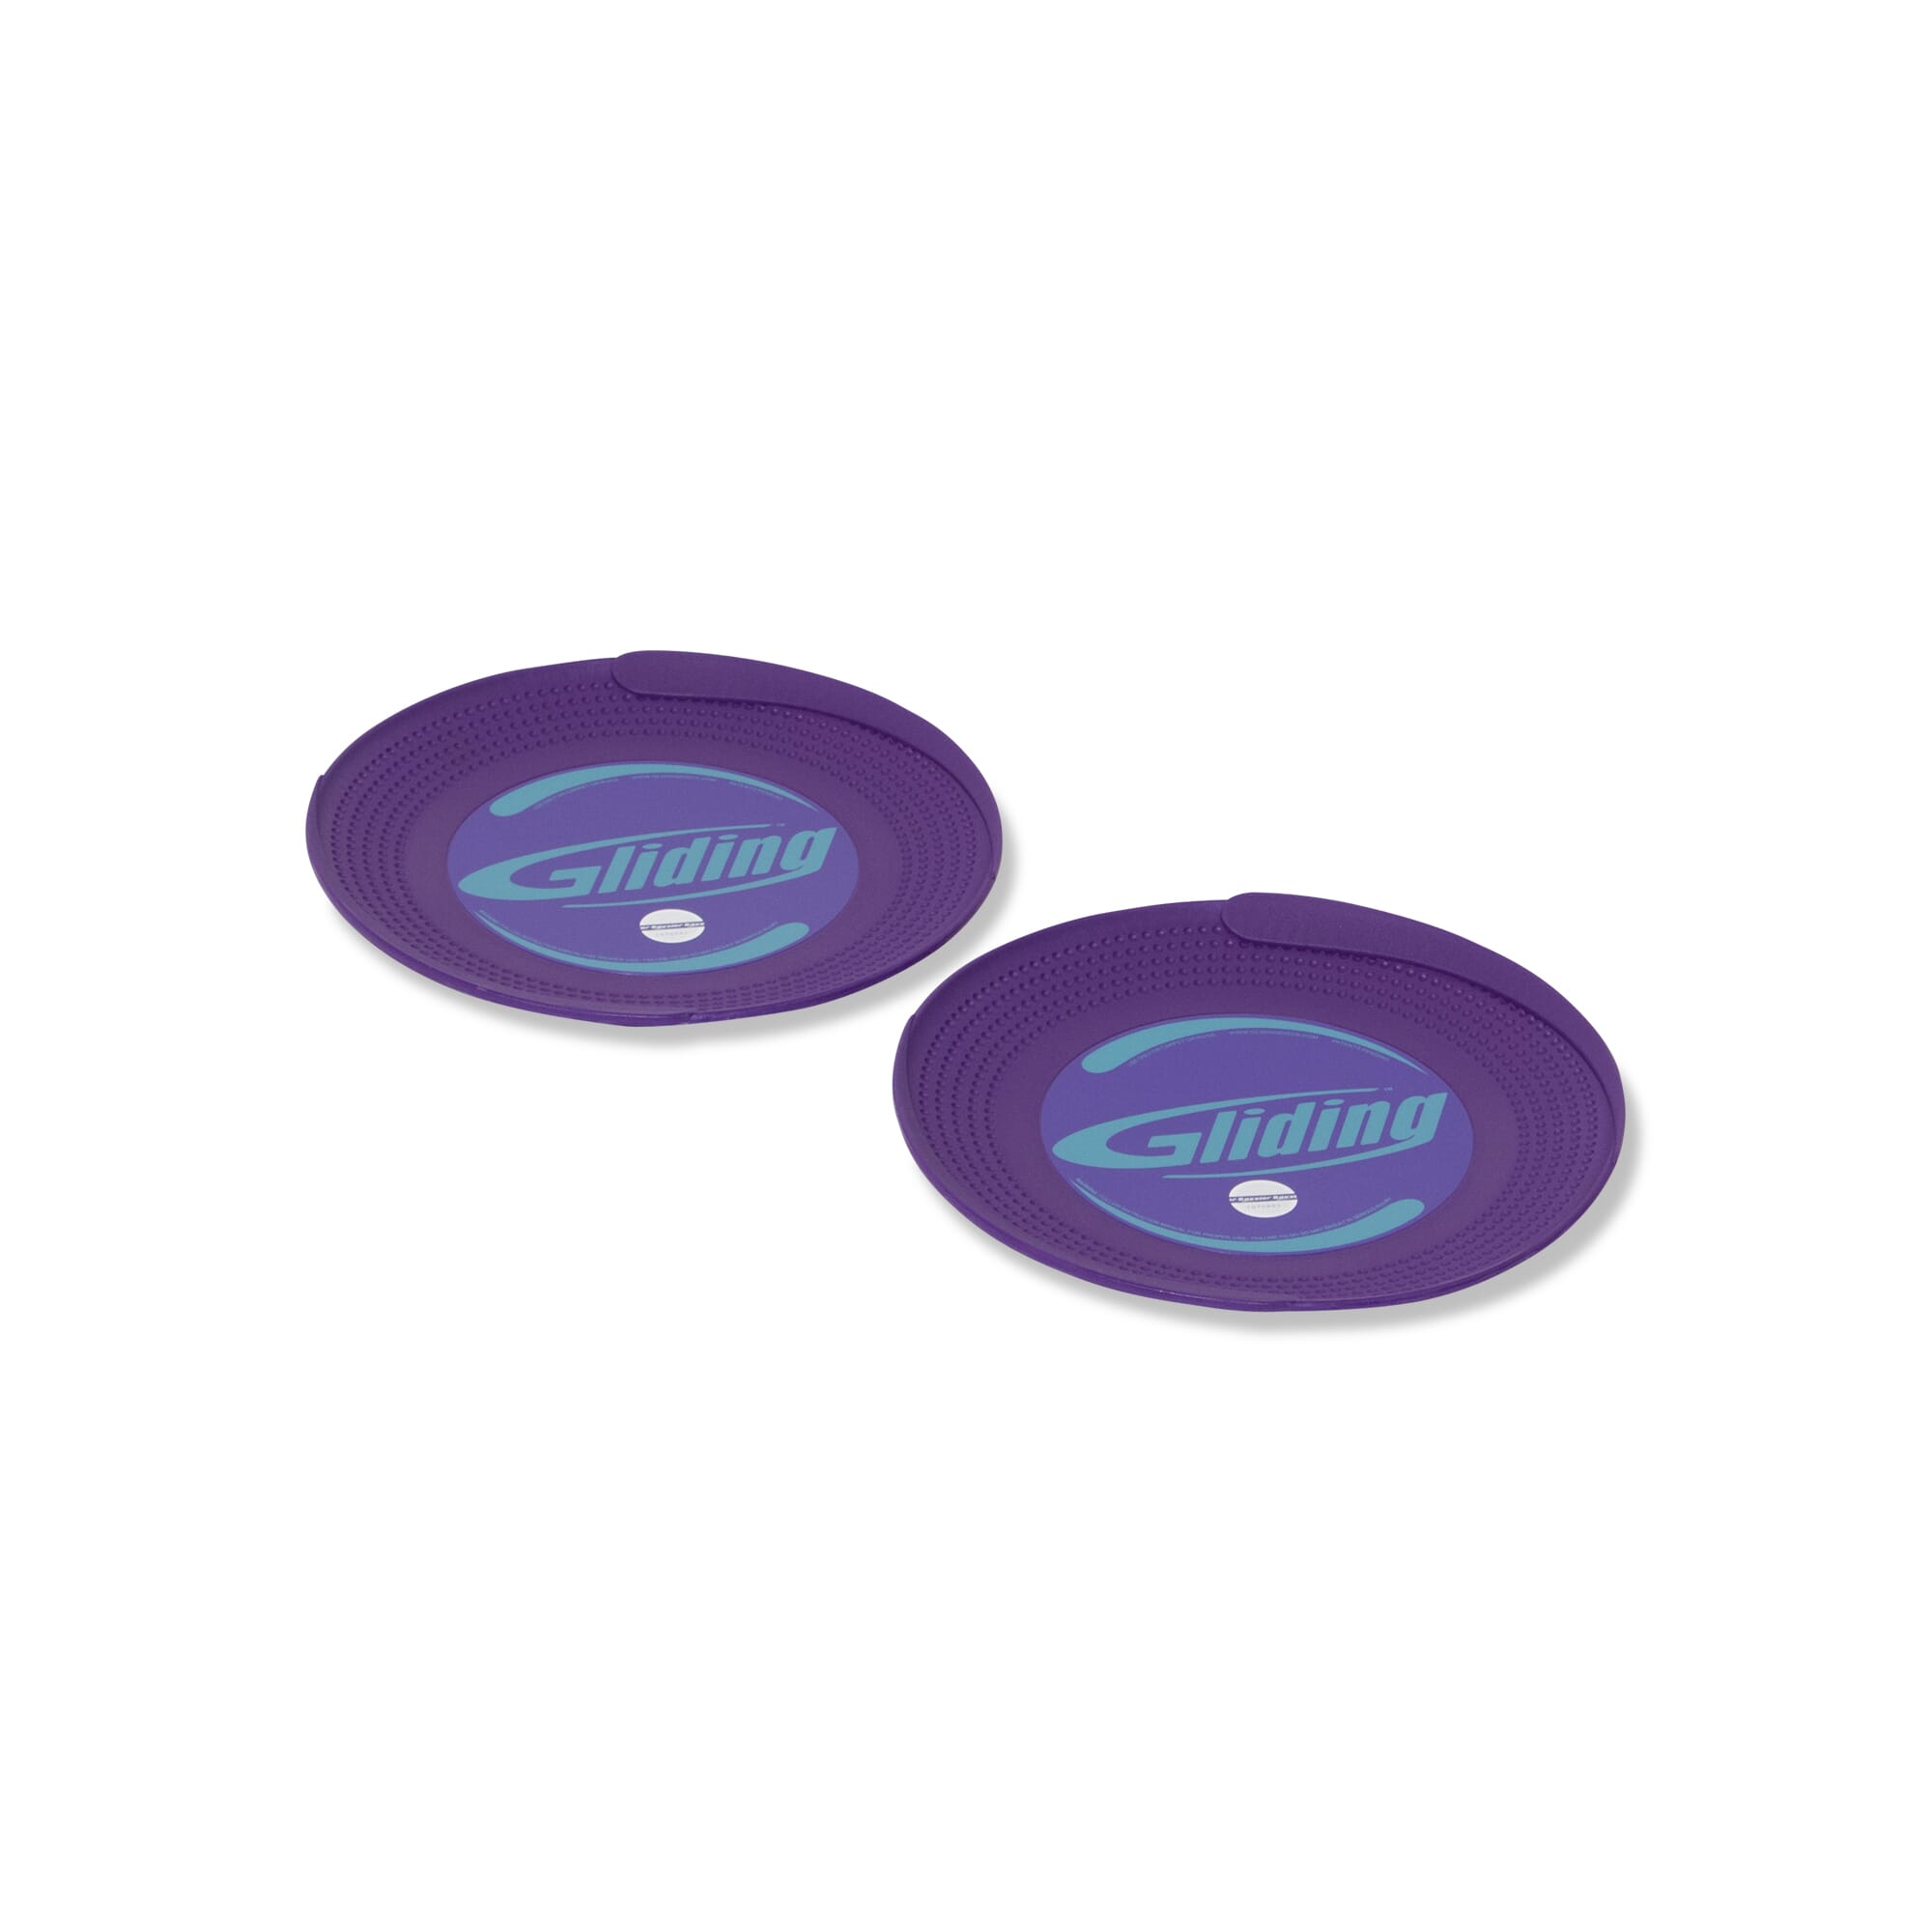 Gliding Discs for Carpeted Floors